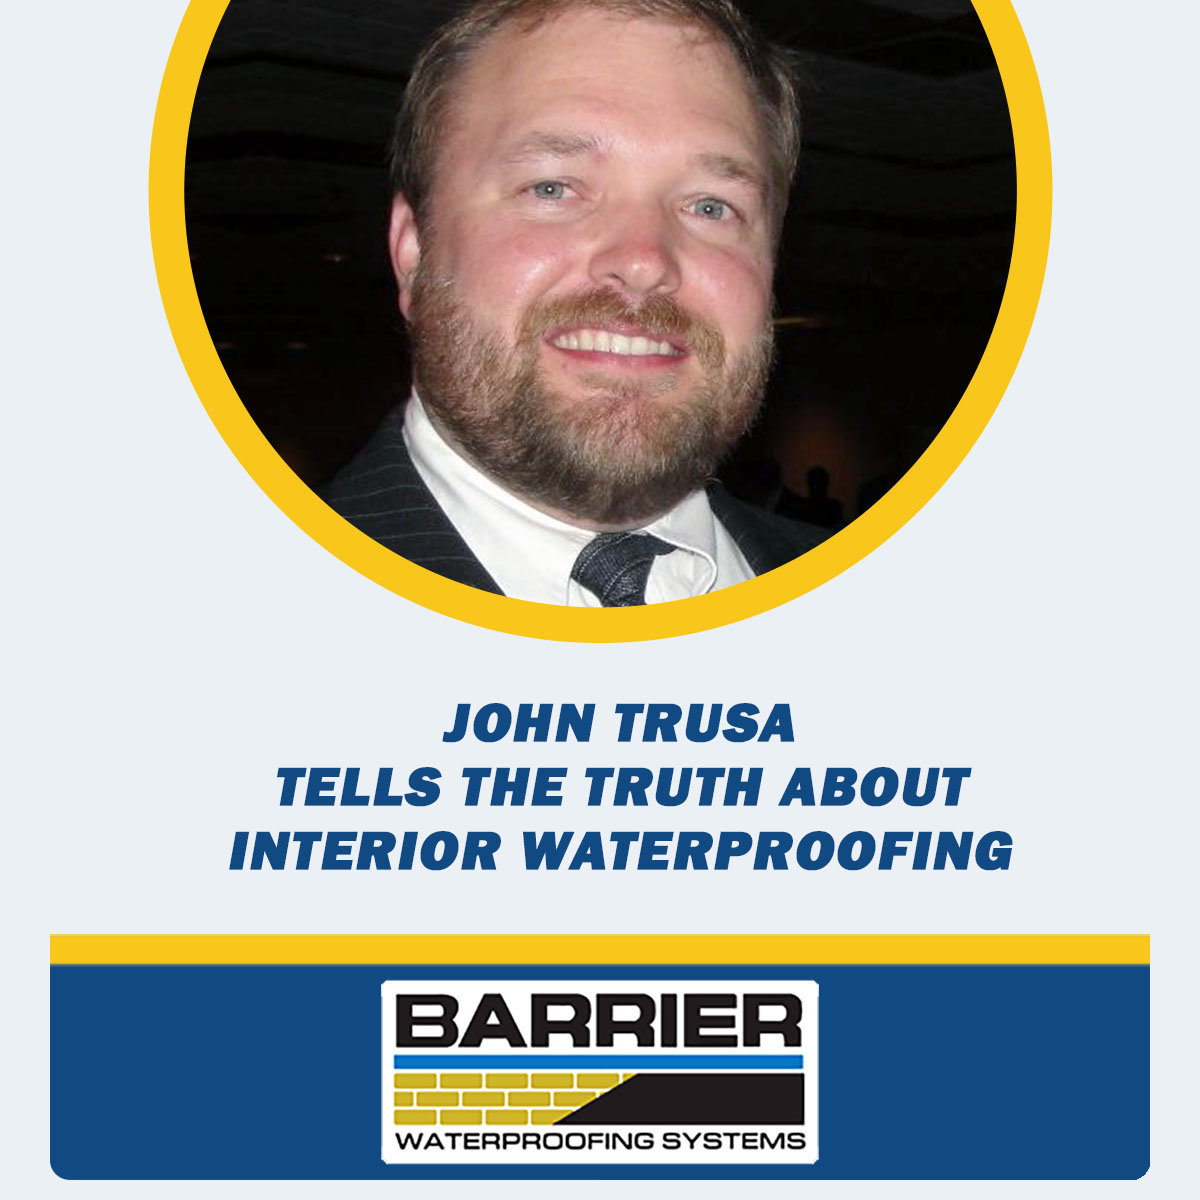 John-Trusa-Tells-The-Truth-About-Interior-Waterproofing